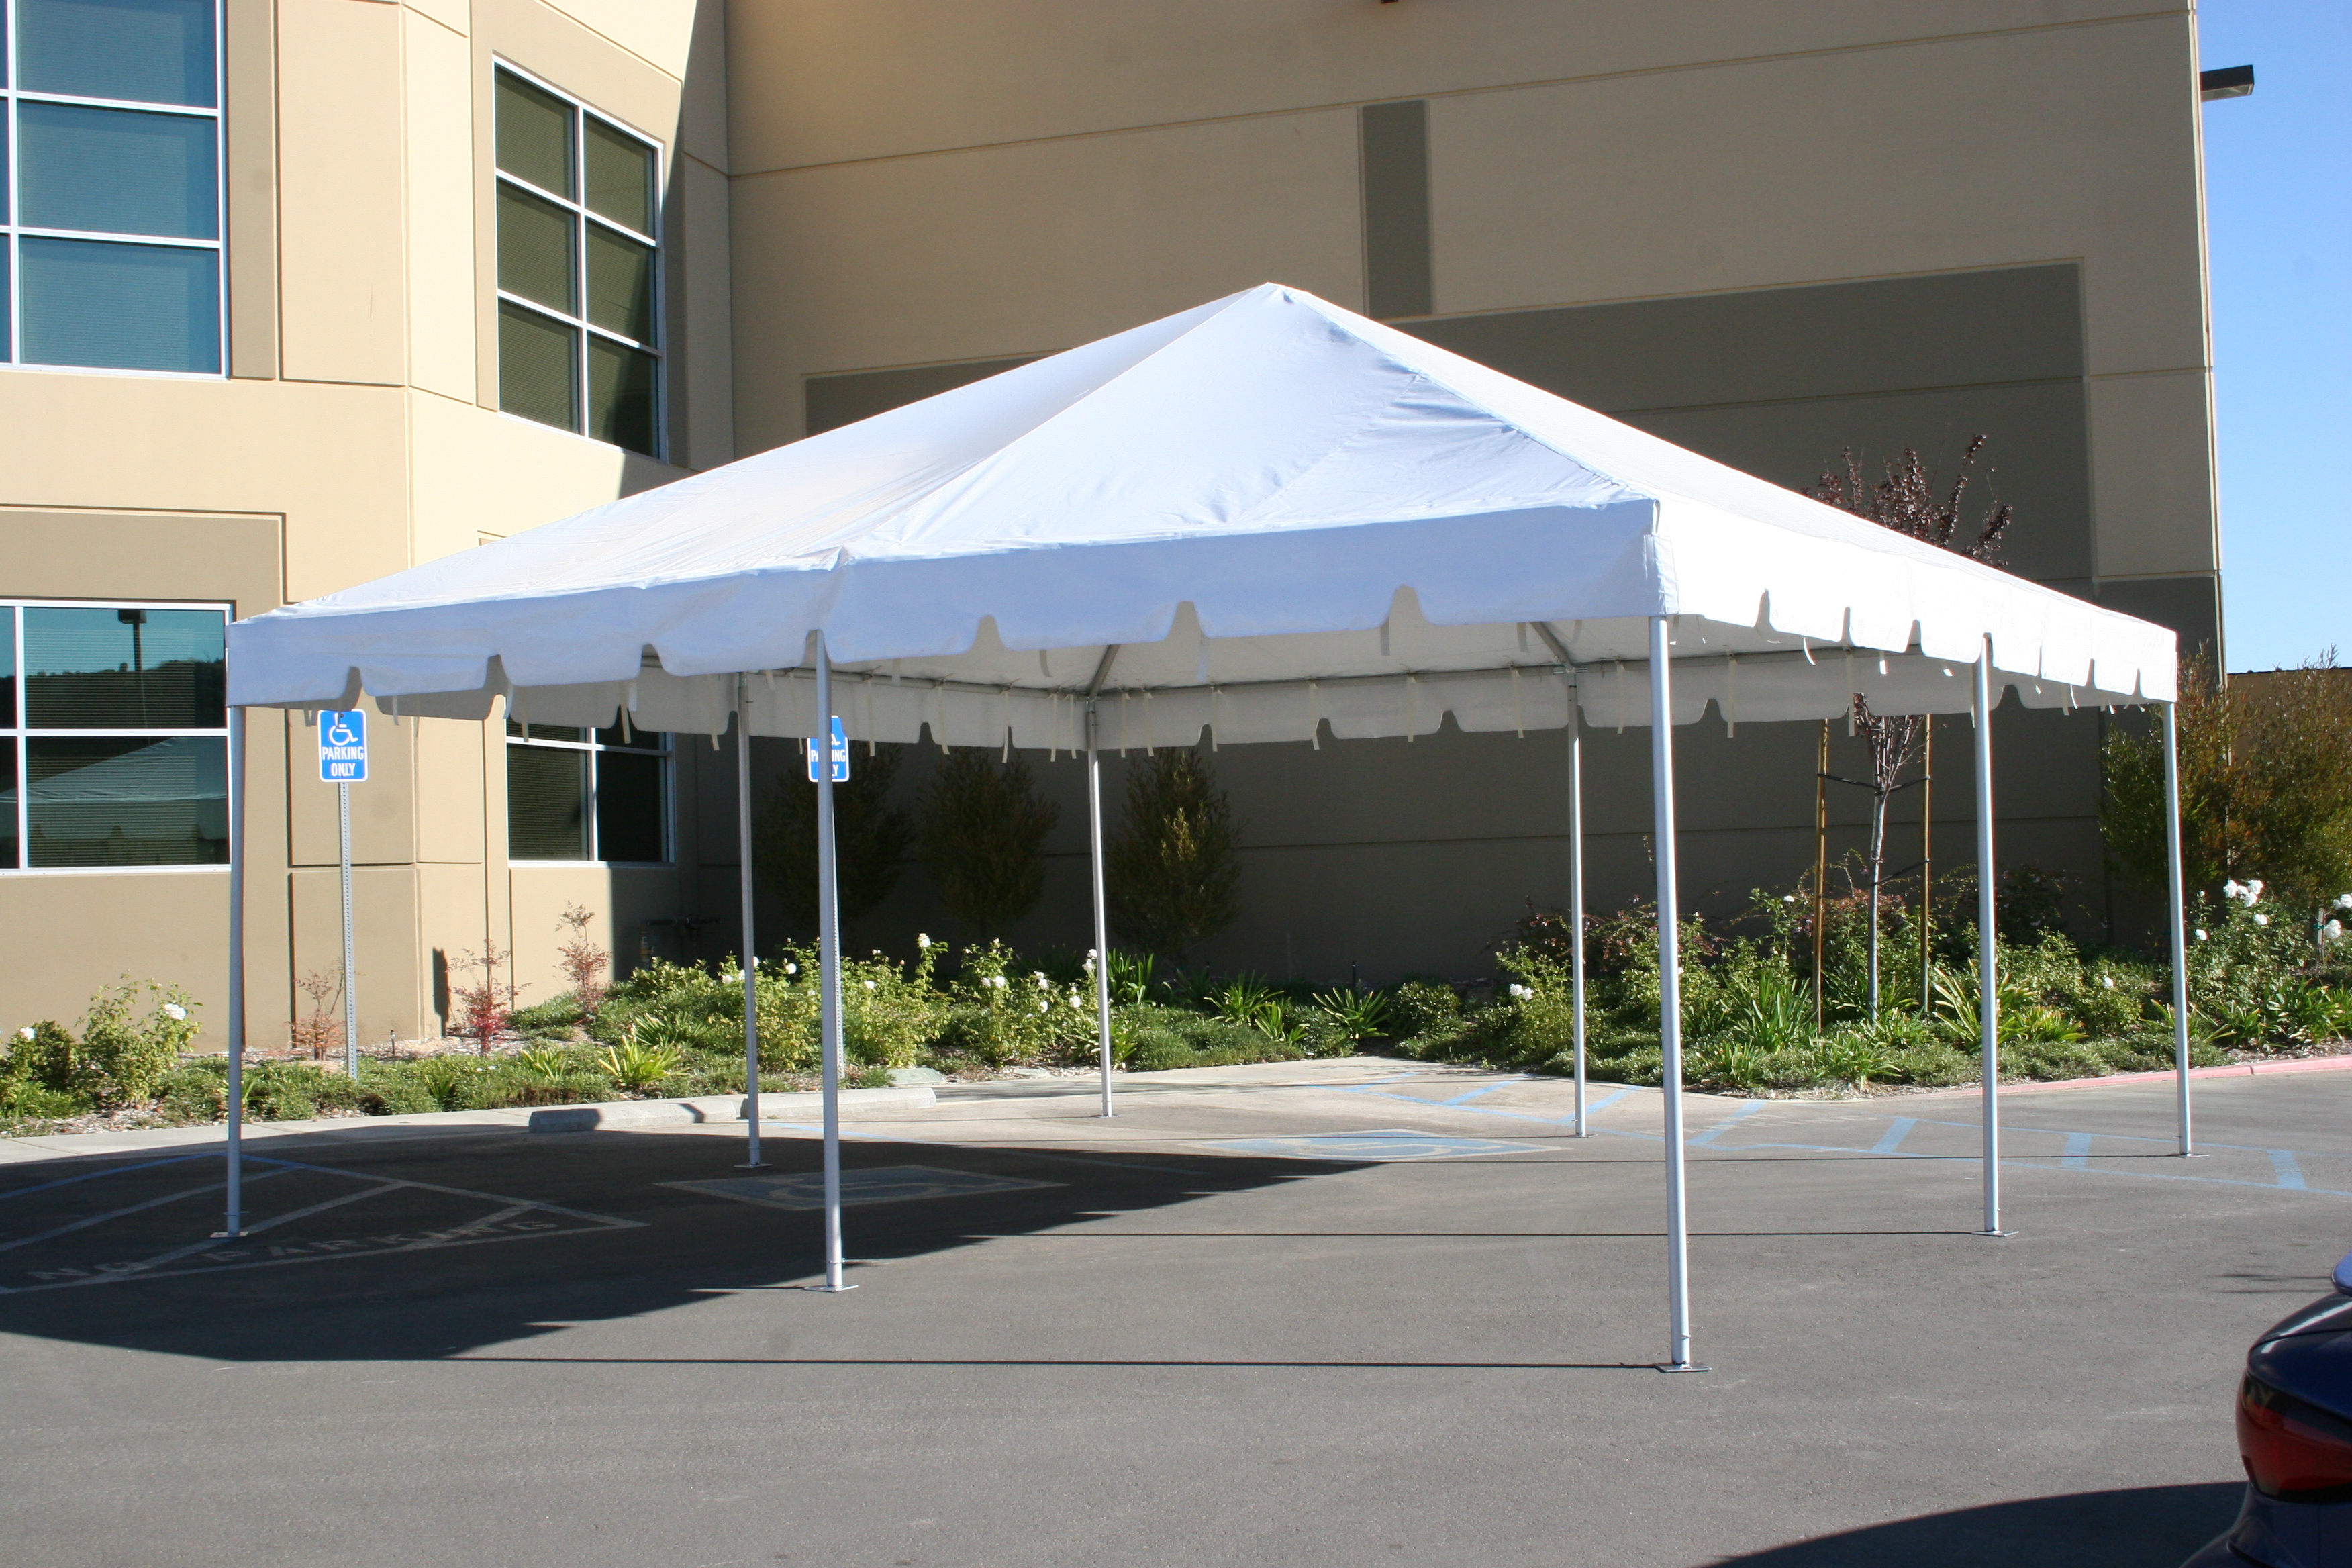 20X20 FRAME TENT SEATS 32 - Michiana Tool and Party Rental